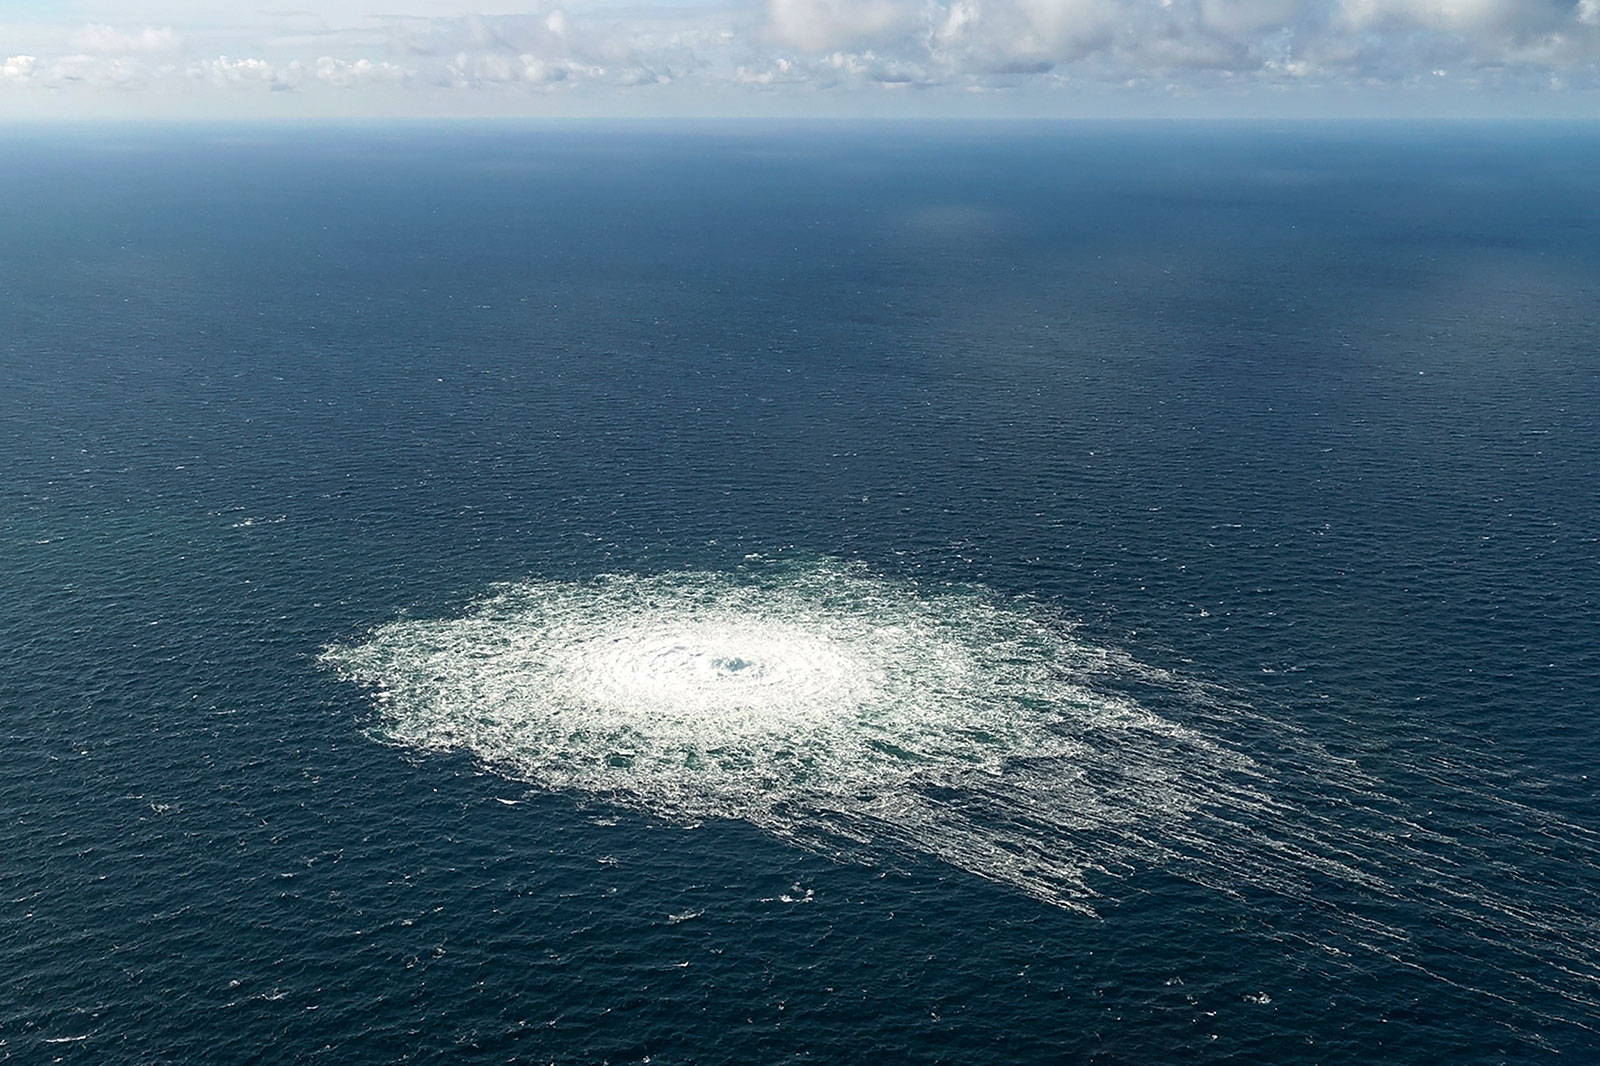 A large disturbance in the sea is seen off the coast of the Danish island of Bornholm on Tuesday, September 27.